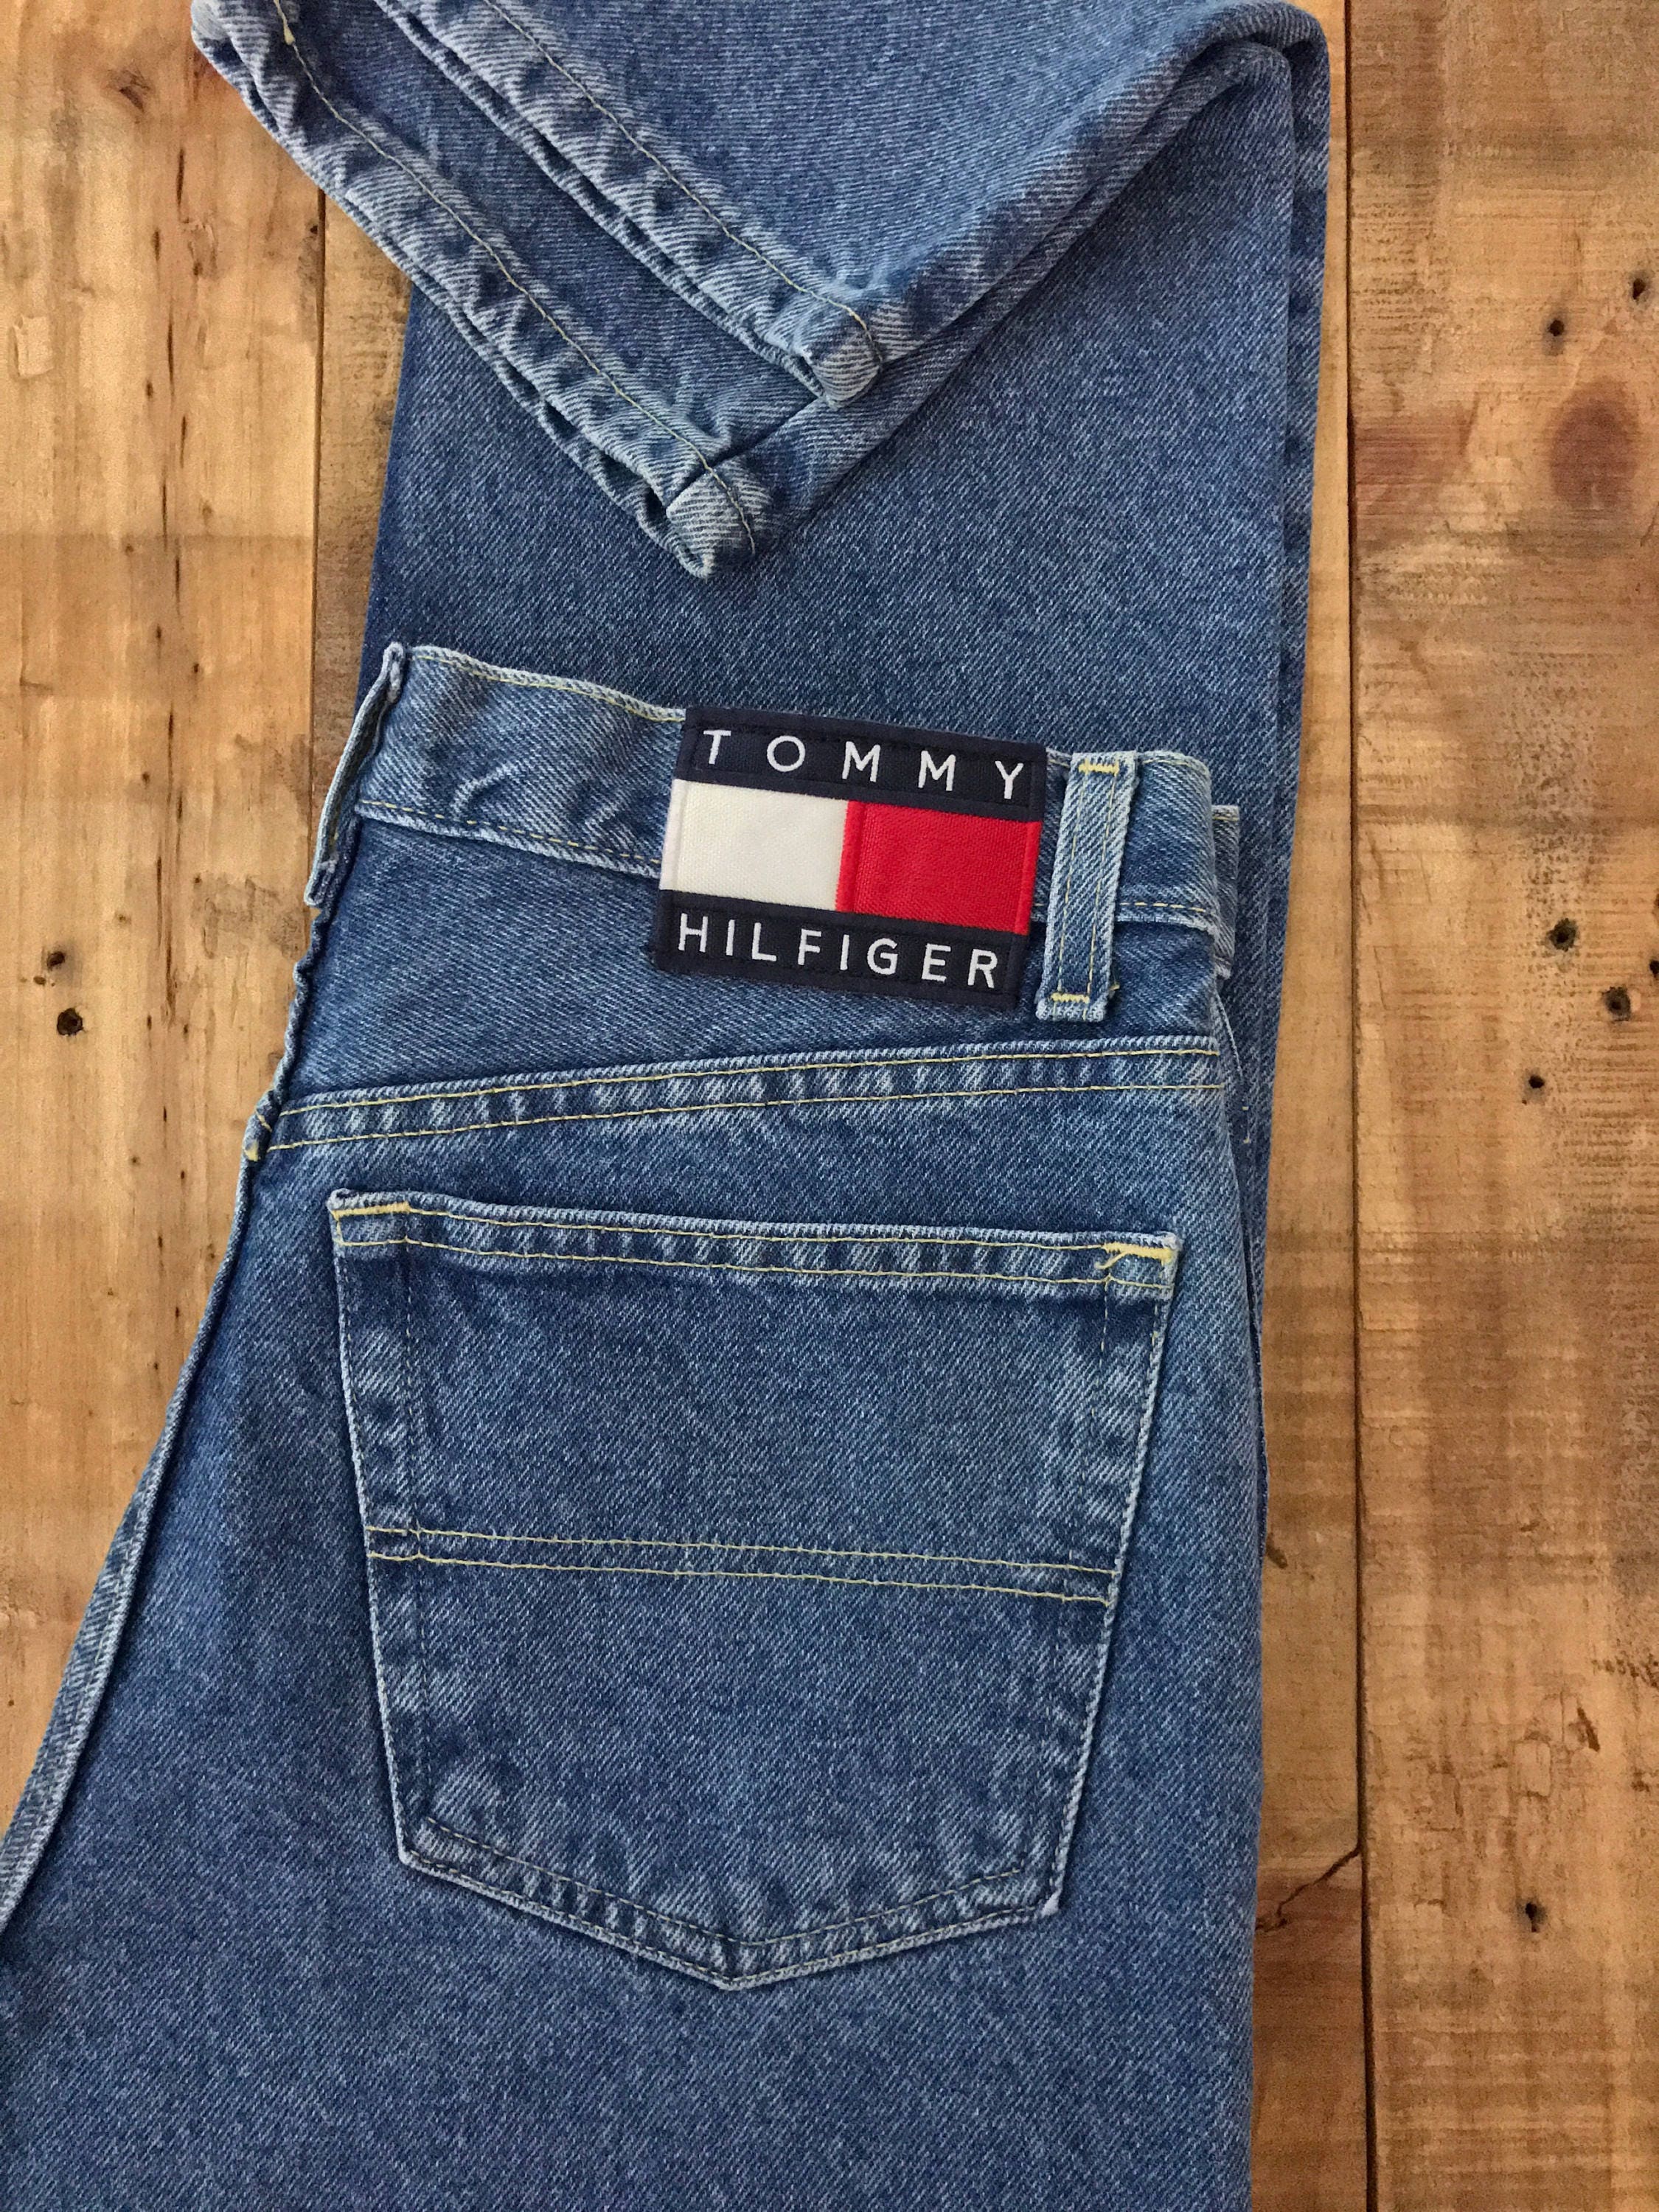 30 Tommy Hilfiger Jeans Vintage / High Waisted Tommy Jeans / | Etsy